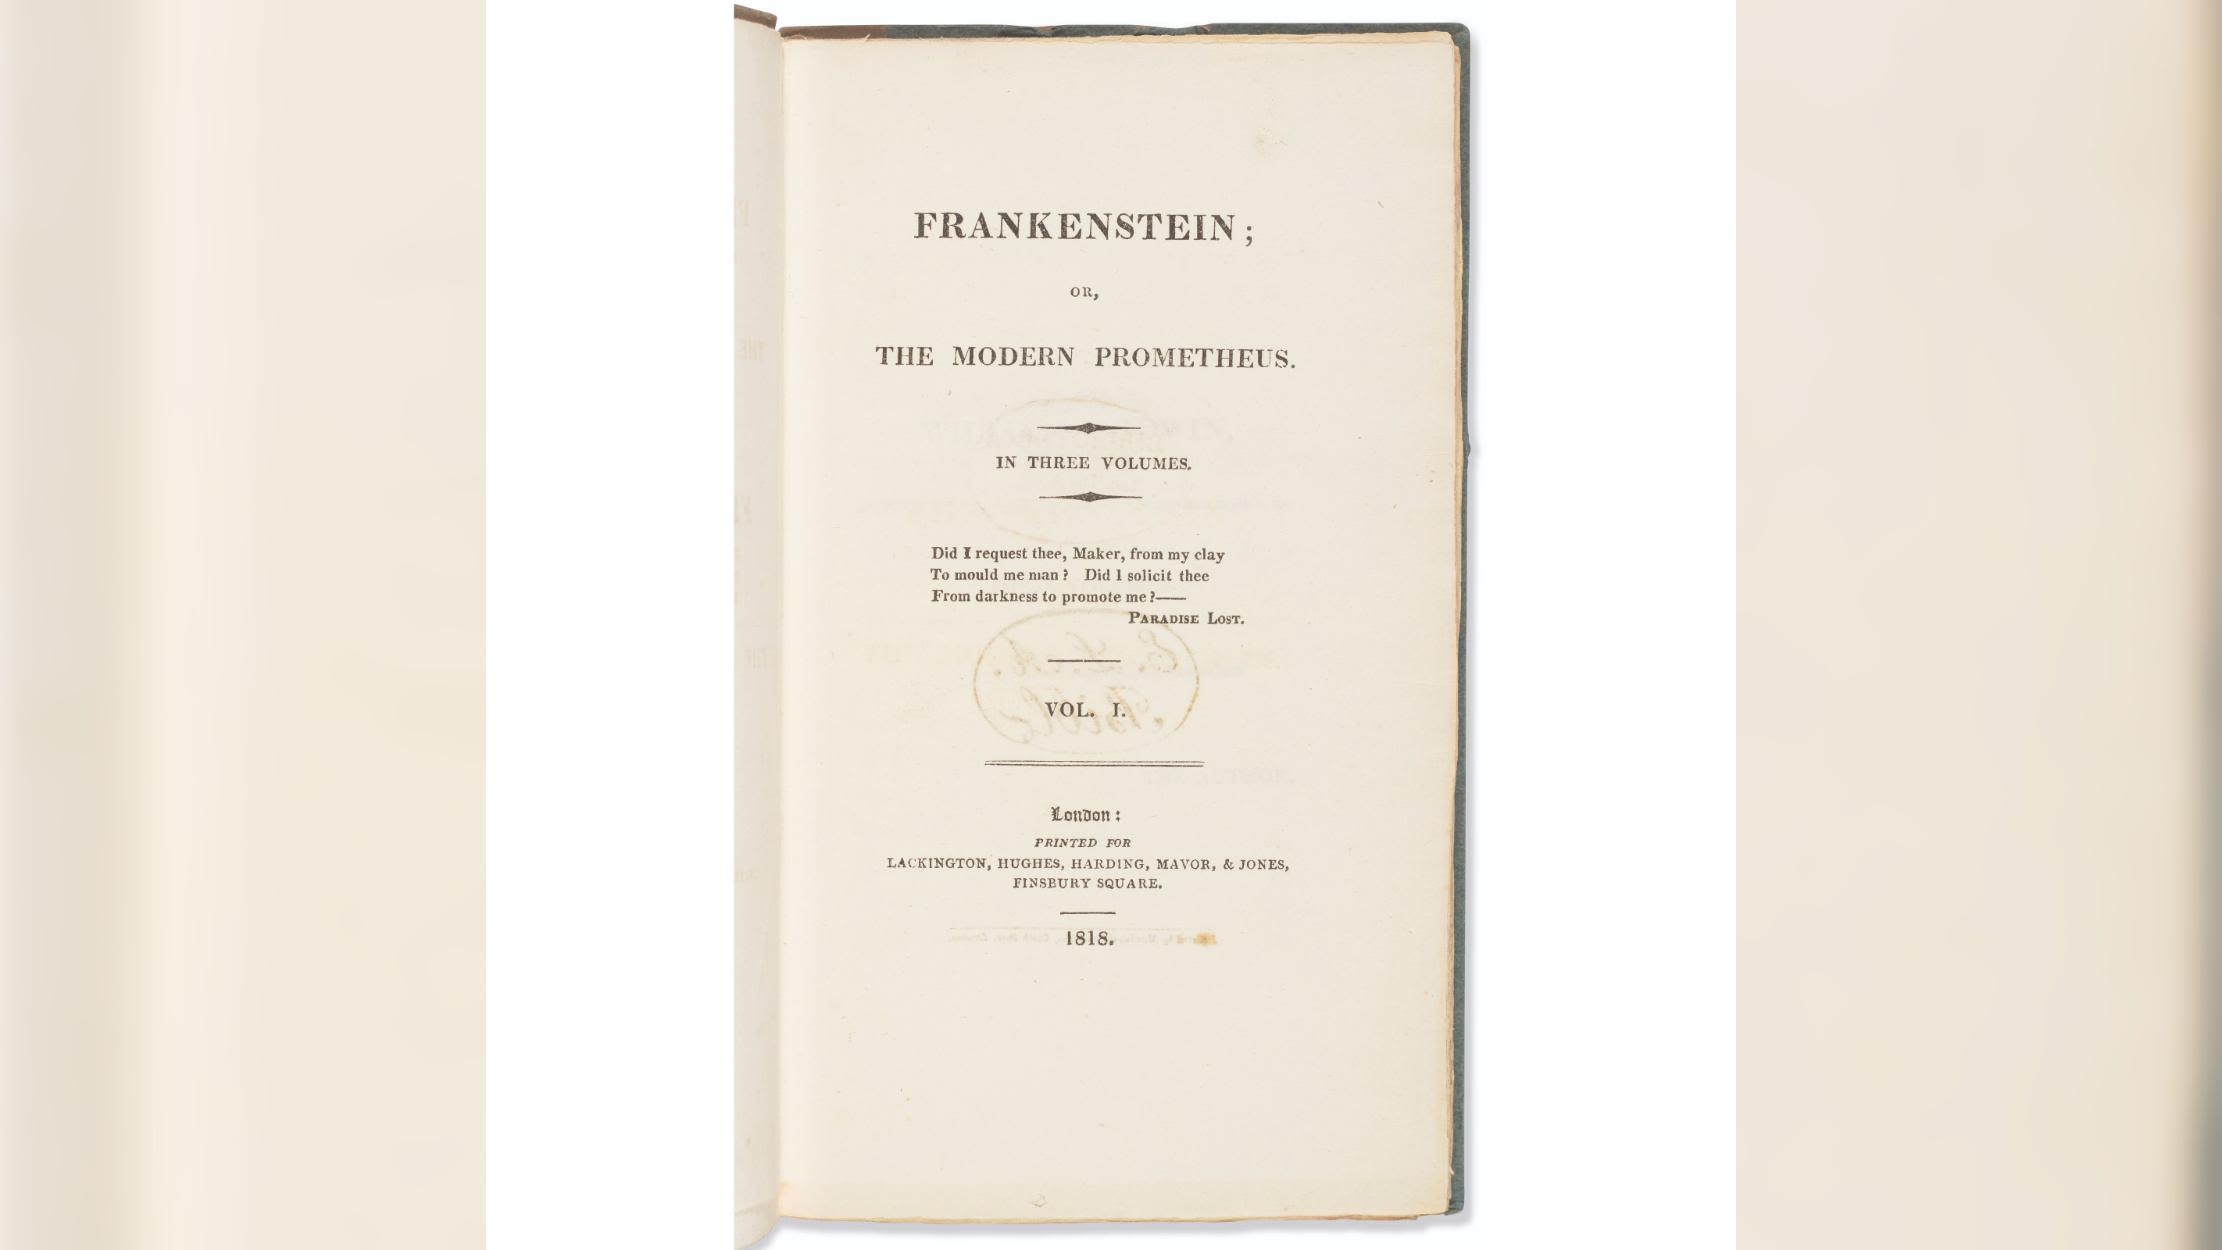 First edition copy of 'Frankenstein' sells for over $1 million at auction